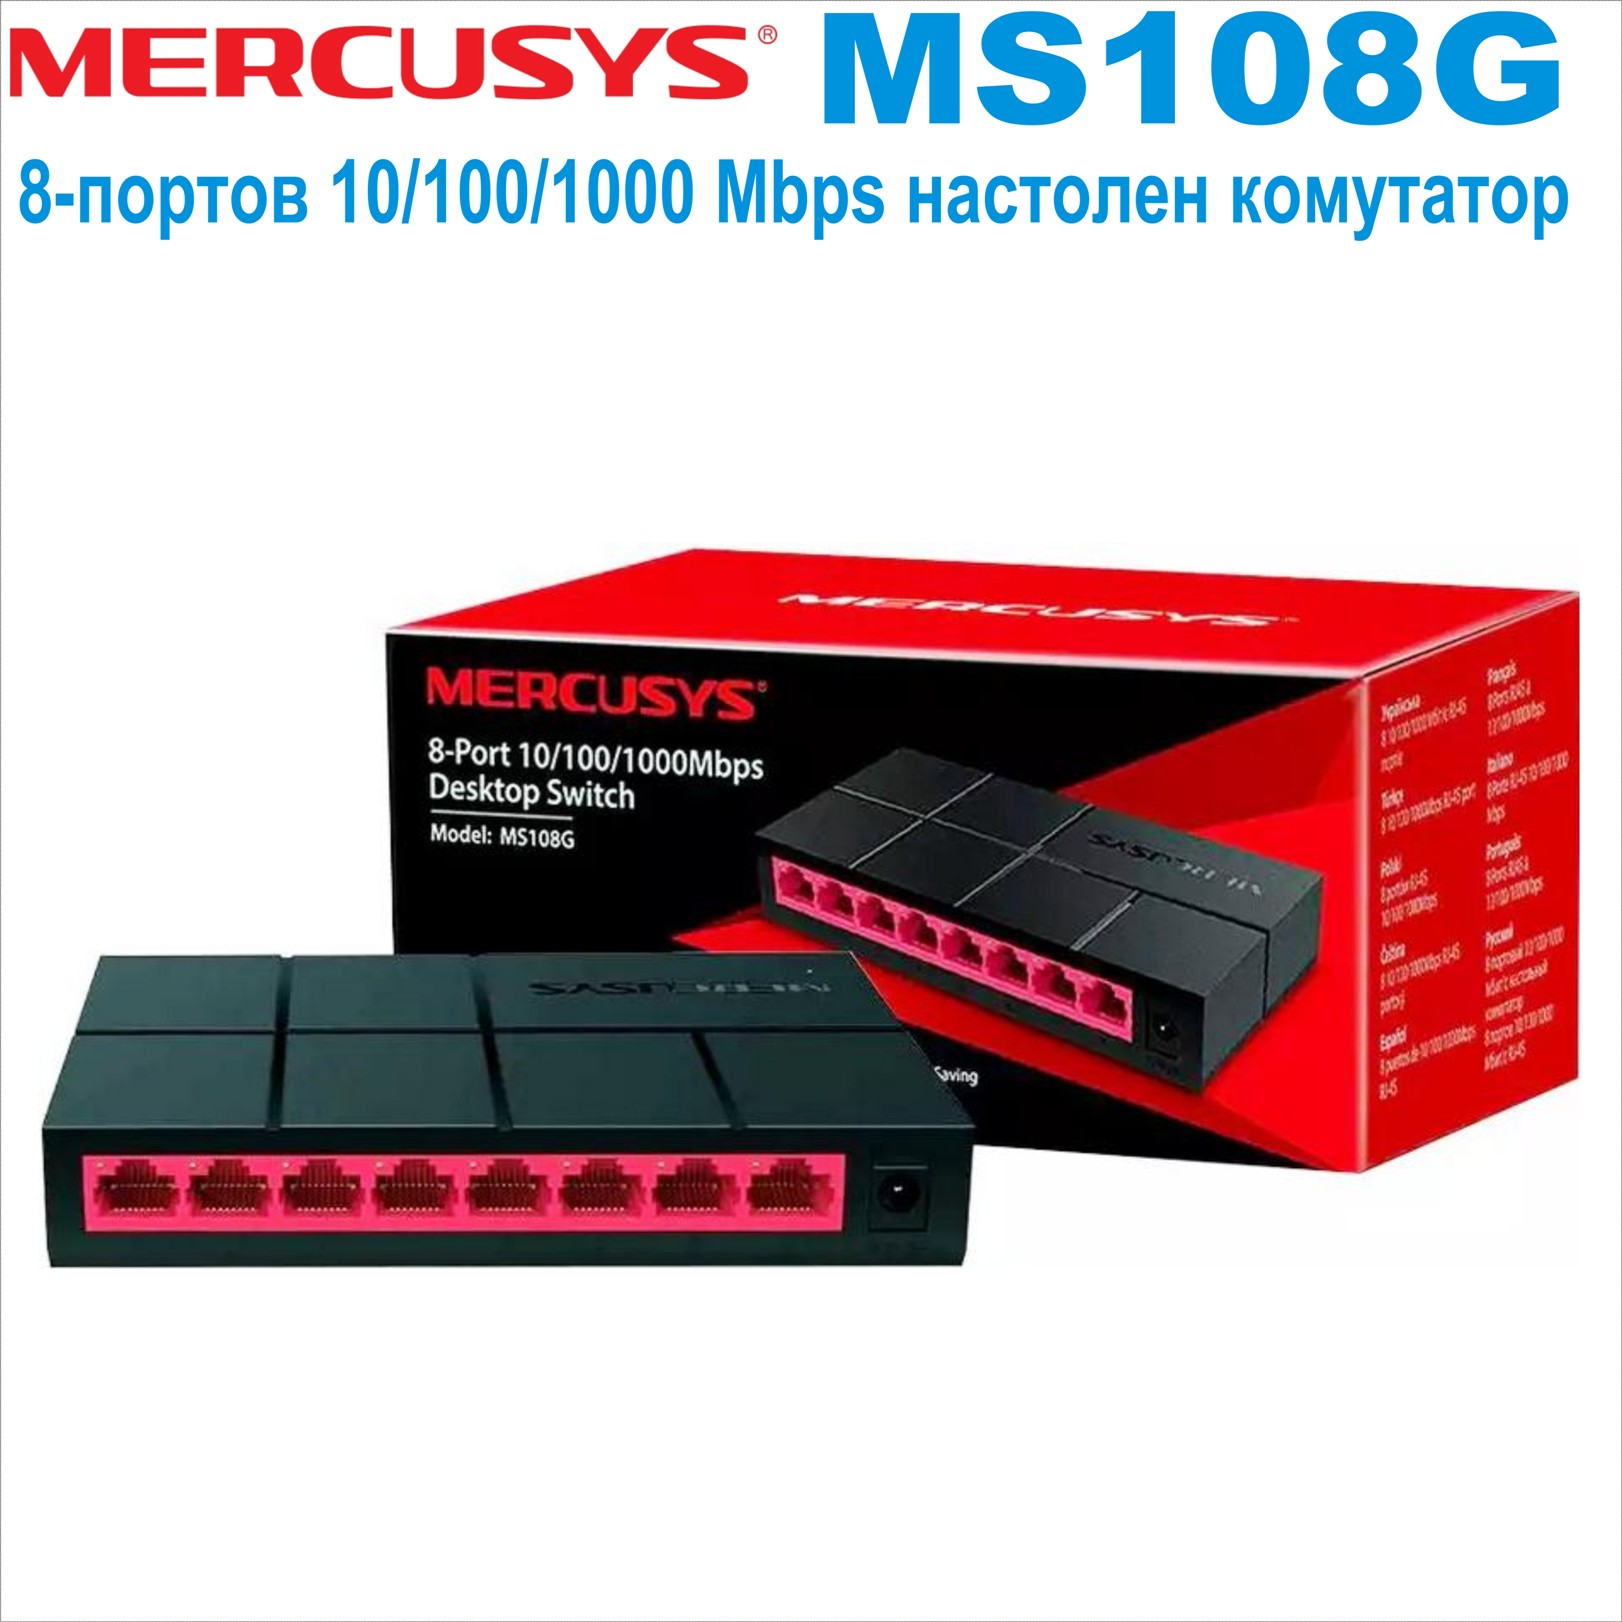 8port 10/100/1000Mbps Switch Mercusys MS108G